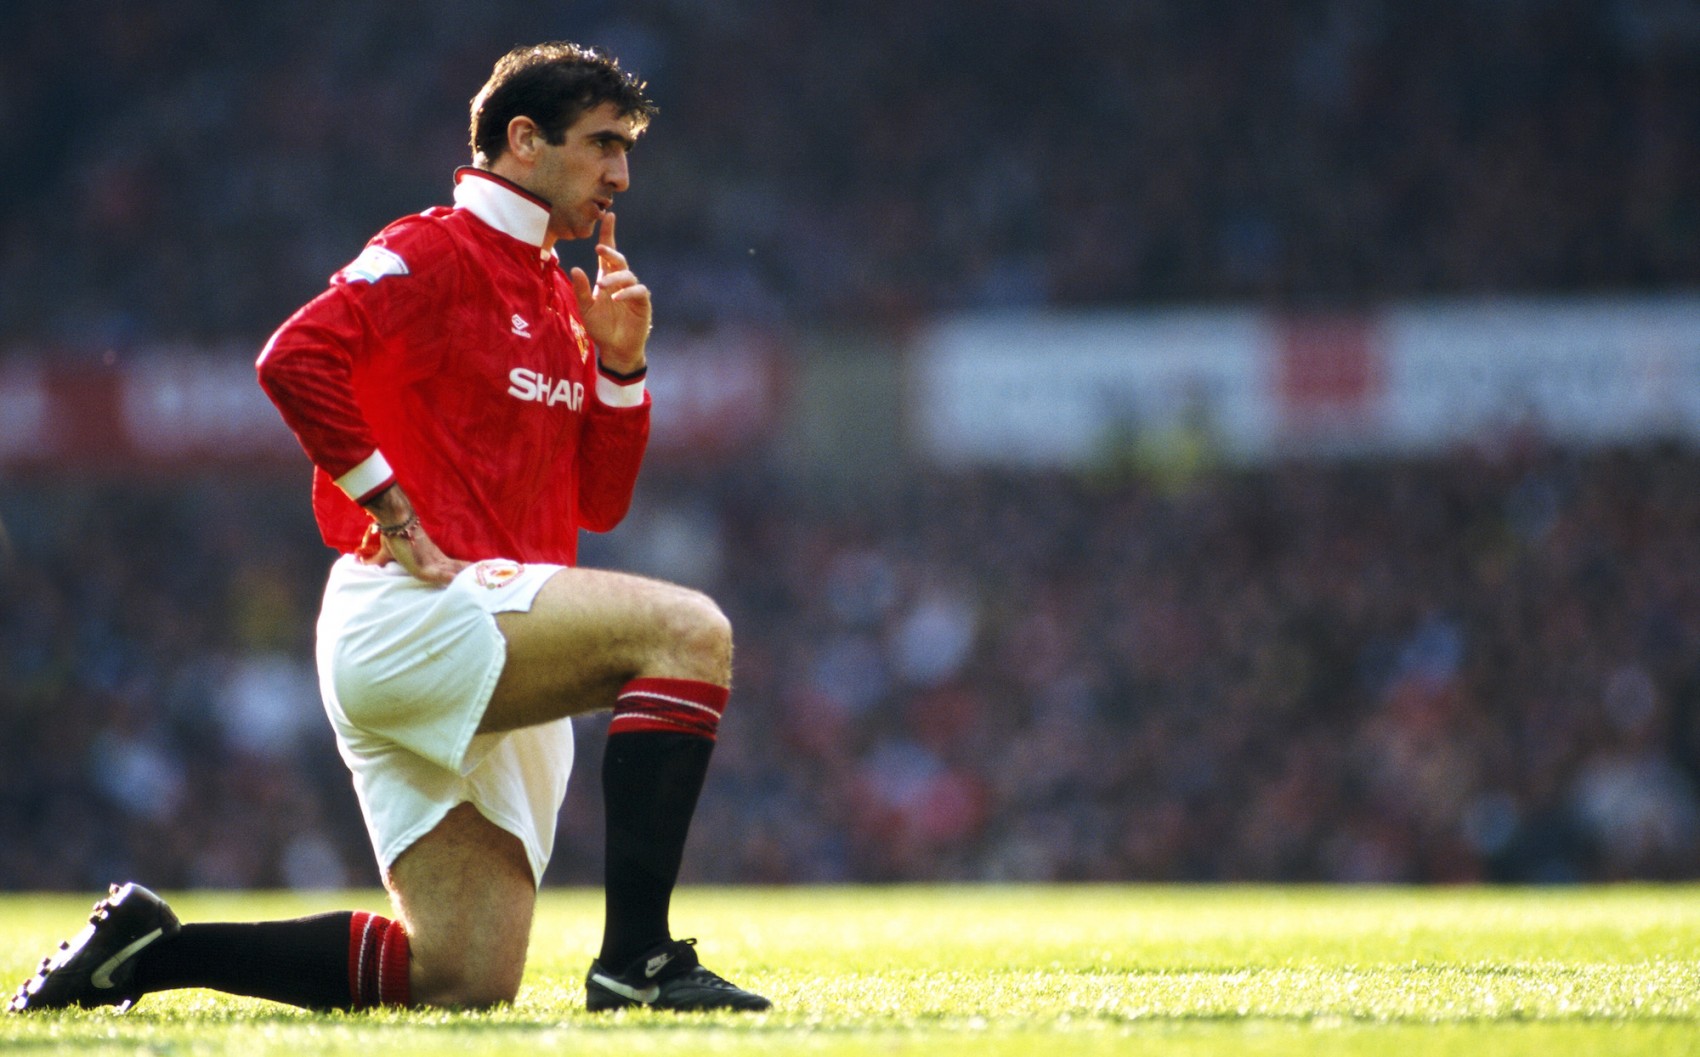 MANCHESTER, UNITED KINGDOM - APRIL 23: Manchester United striker Eric Cantona reacts during an FA Premier League match between Manchester United and Manchester City at Old Trafford on April 23, 1993 in Manchester, England, United won the game 2-0 with both goals scored by Cantona.  (Photo by Anton Want/Allsport/Getty Images)